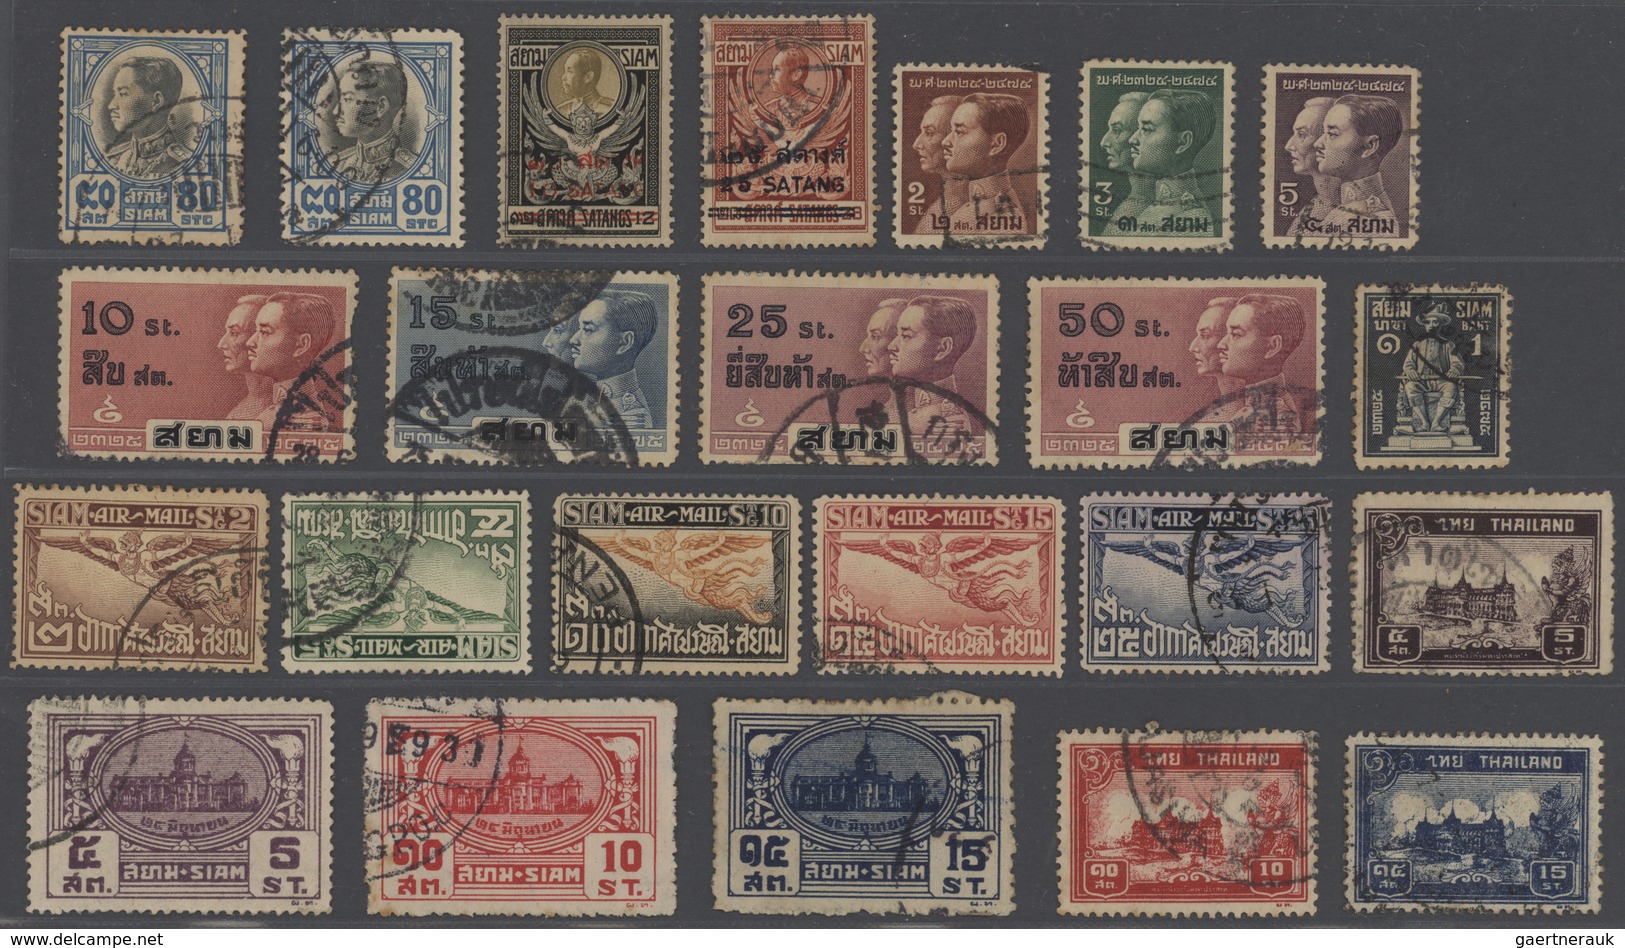 24232A Thailand: 1883/1980, mostly used on large stockcards (from 1950 in envelopes), appr. 550 copies, inc